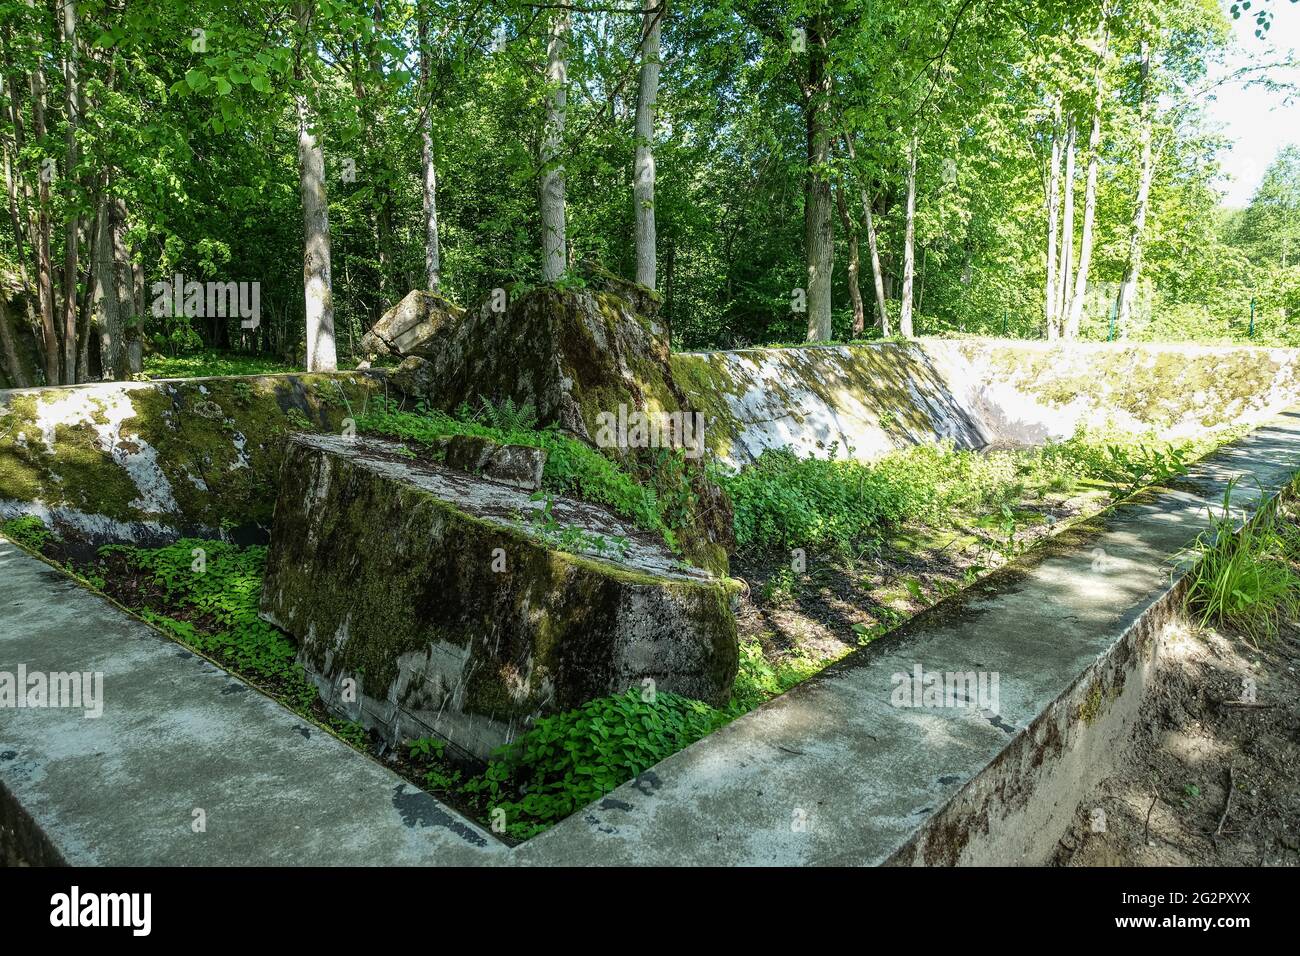 Gierloz, Poland 2nd, June 2021 People visiting the WWII era Adolf Hitler's quarters hidden in a forest near Gierloz, Poland, are seen on 3 June 2021 r Wolf's Lair (ger. Wolfsschanze) ruins of Adolf Hilter's war headquarters was a hidden town in the woods consisting of 200 buildings: shelters, barracks, 2 airports, a power station, a railway station, air-conditioners, water supplies, heat-generating plants and two teleprinters Credit: Vadim Pacajev/Alamy Live News Stock Photo